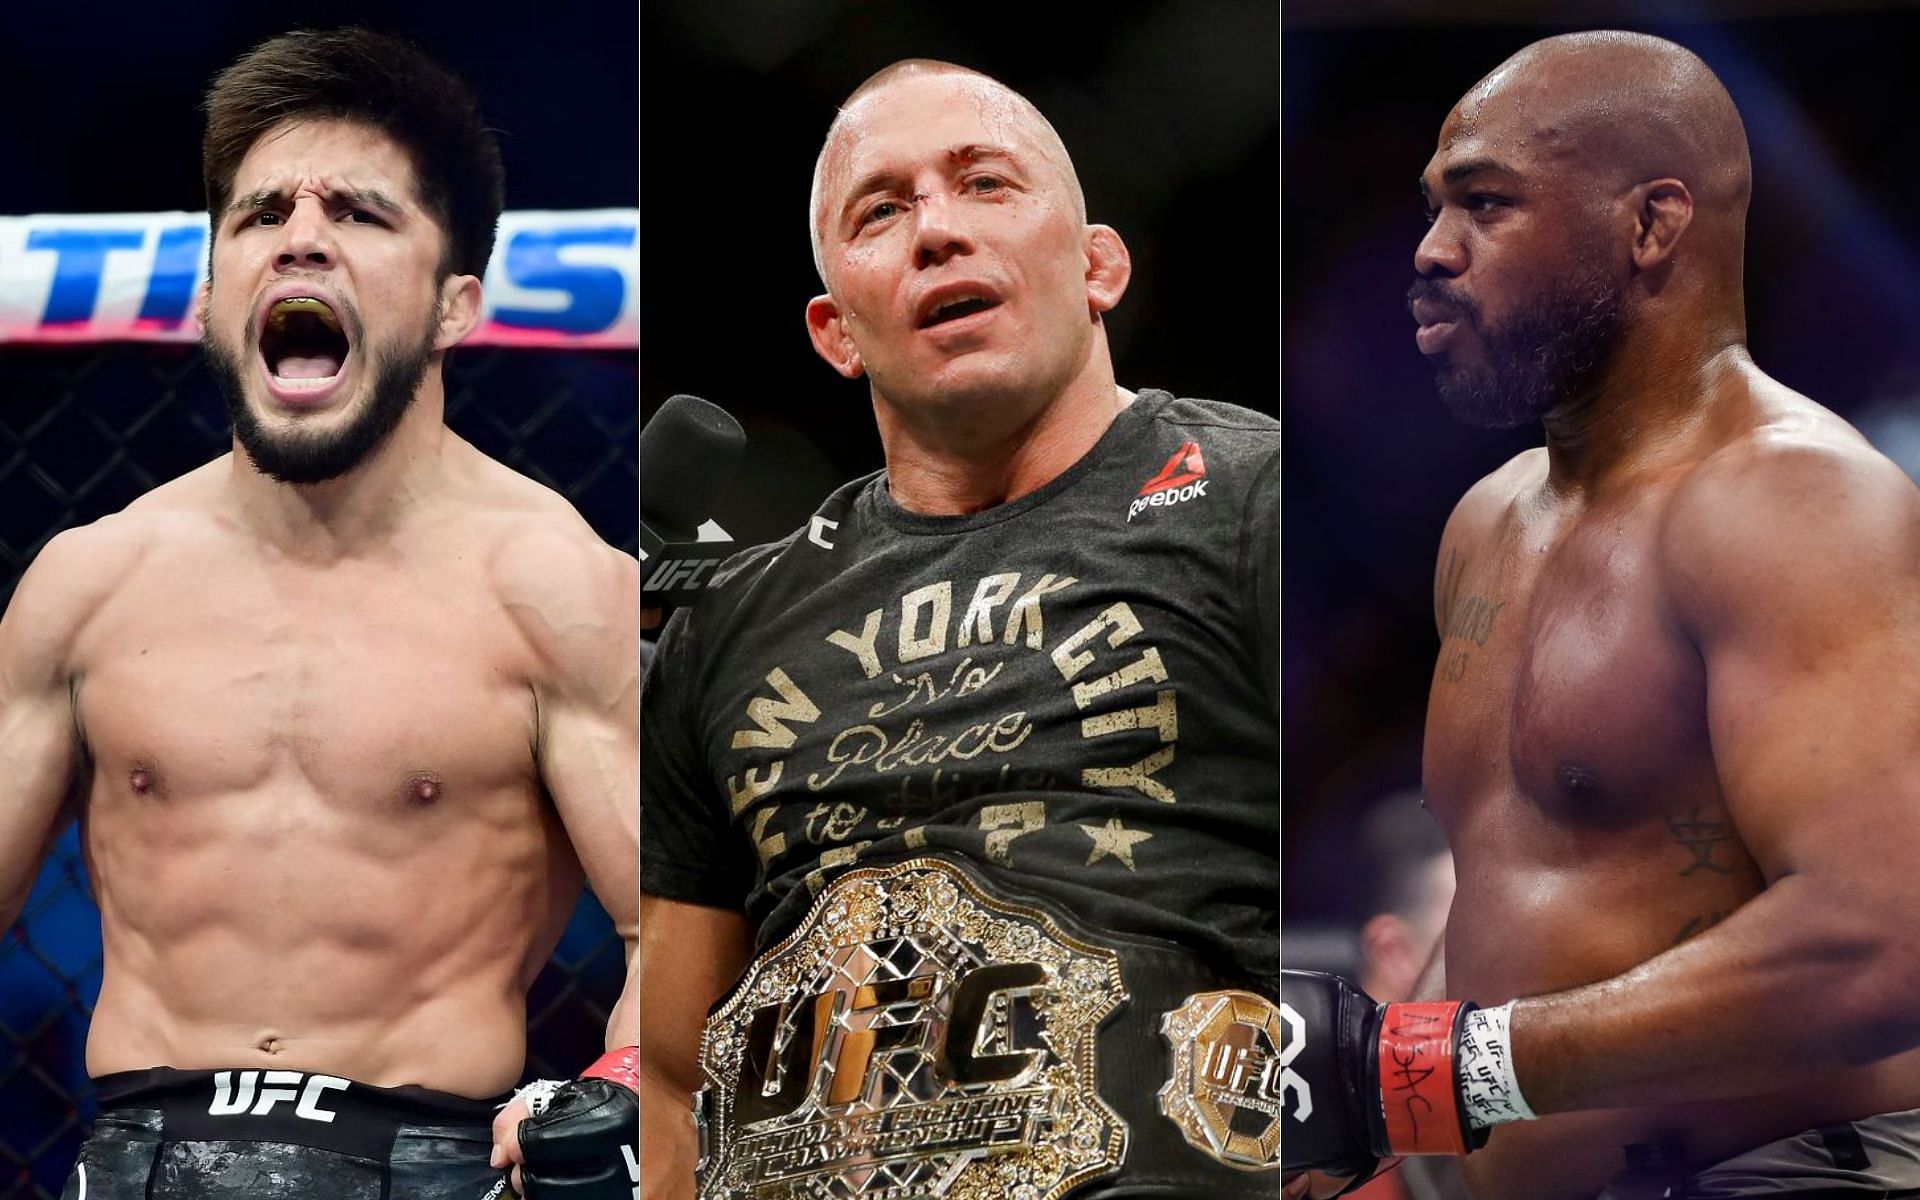 Most Famous UFC Fighters of All Time - Top 20 Fighters